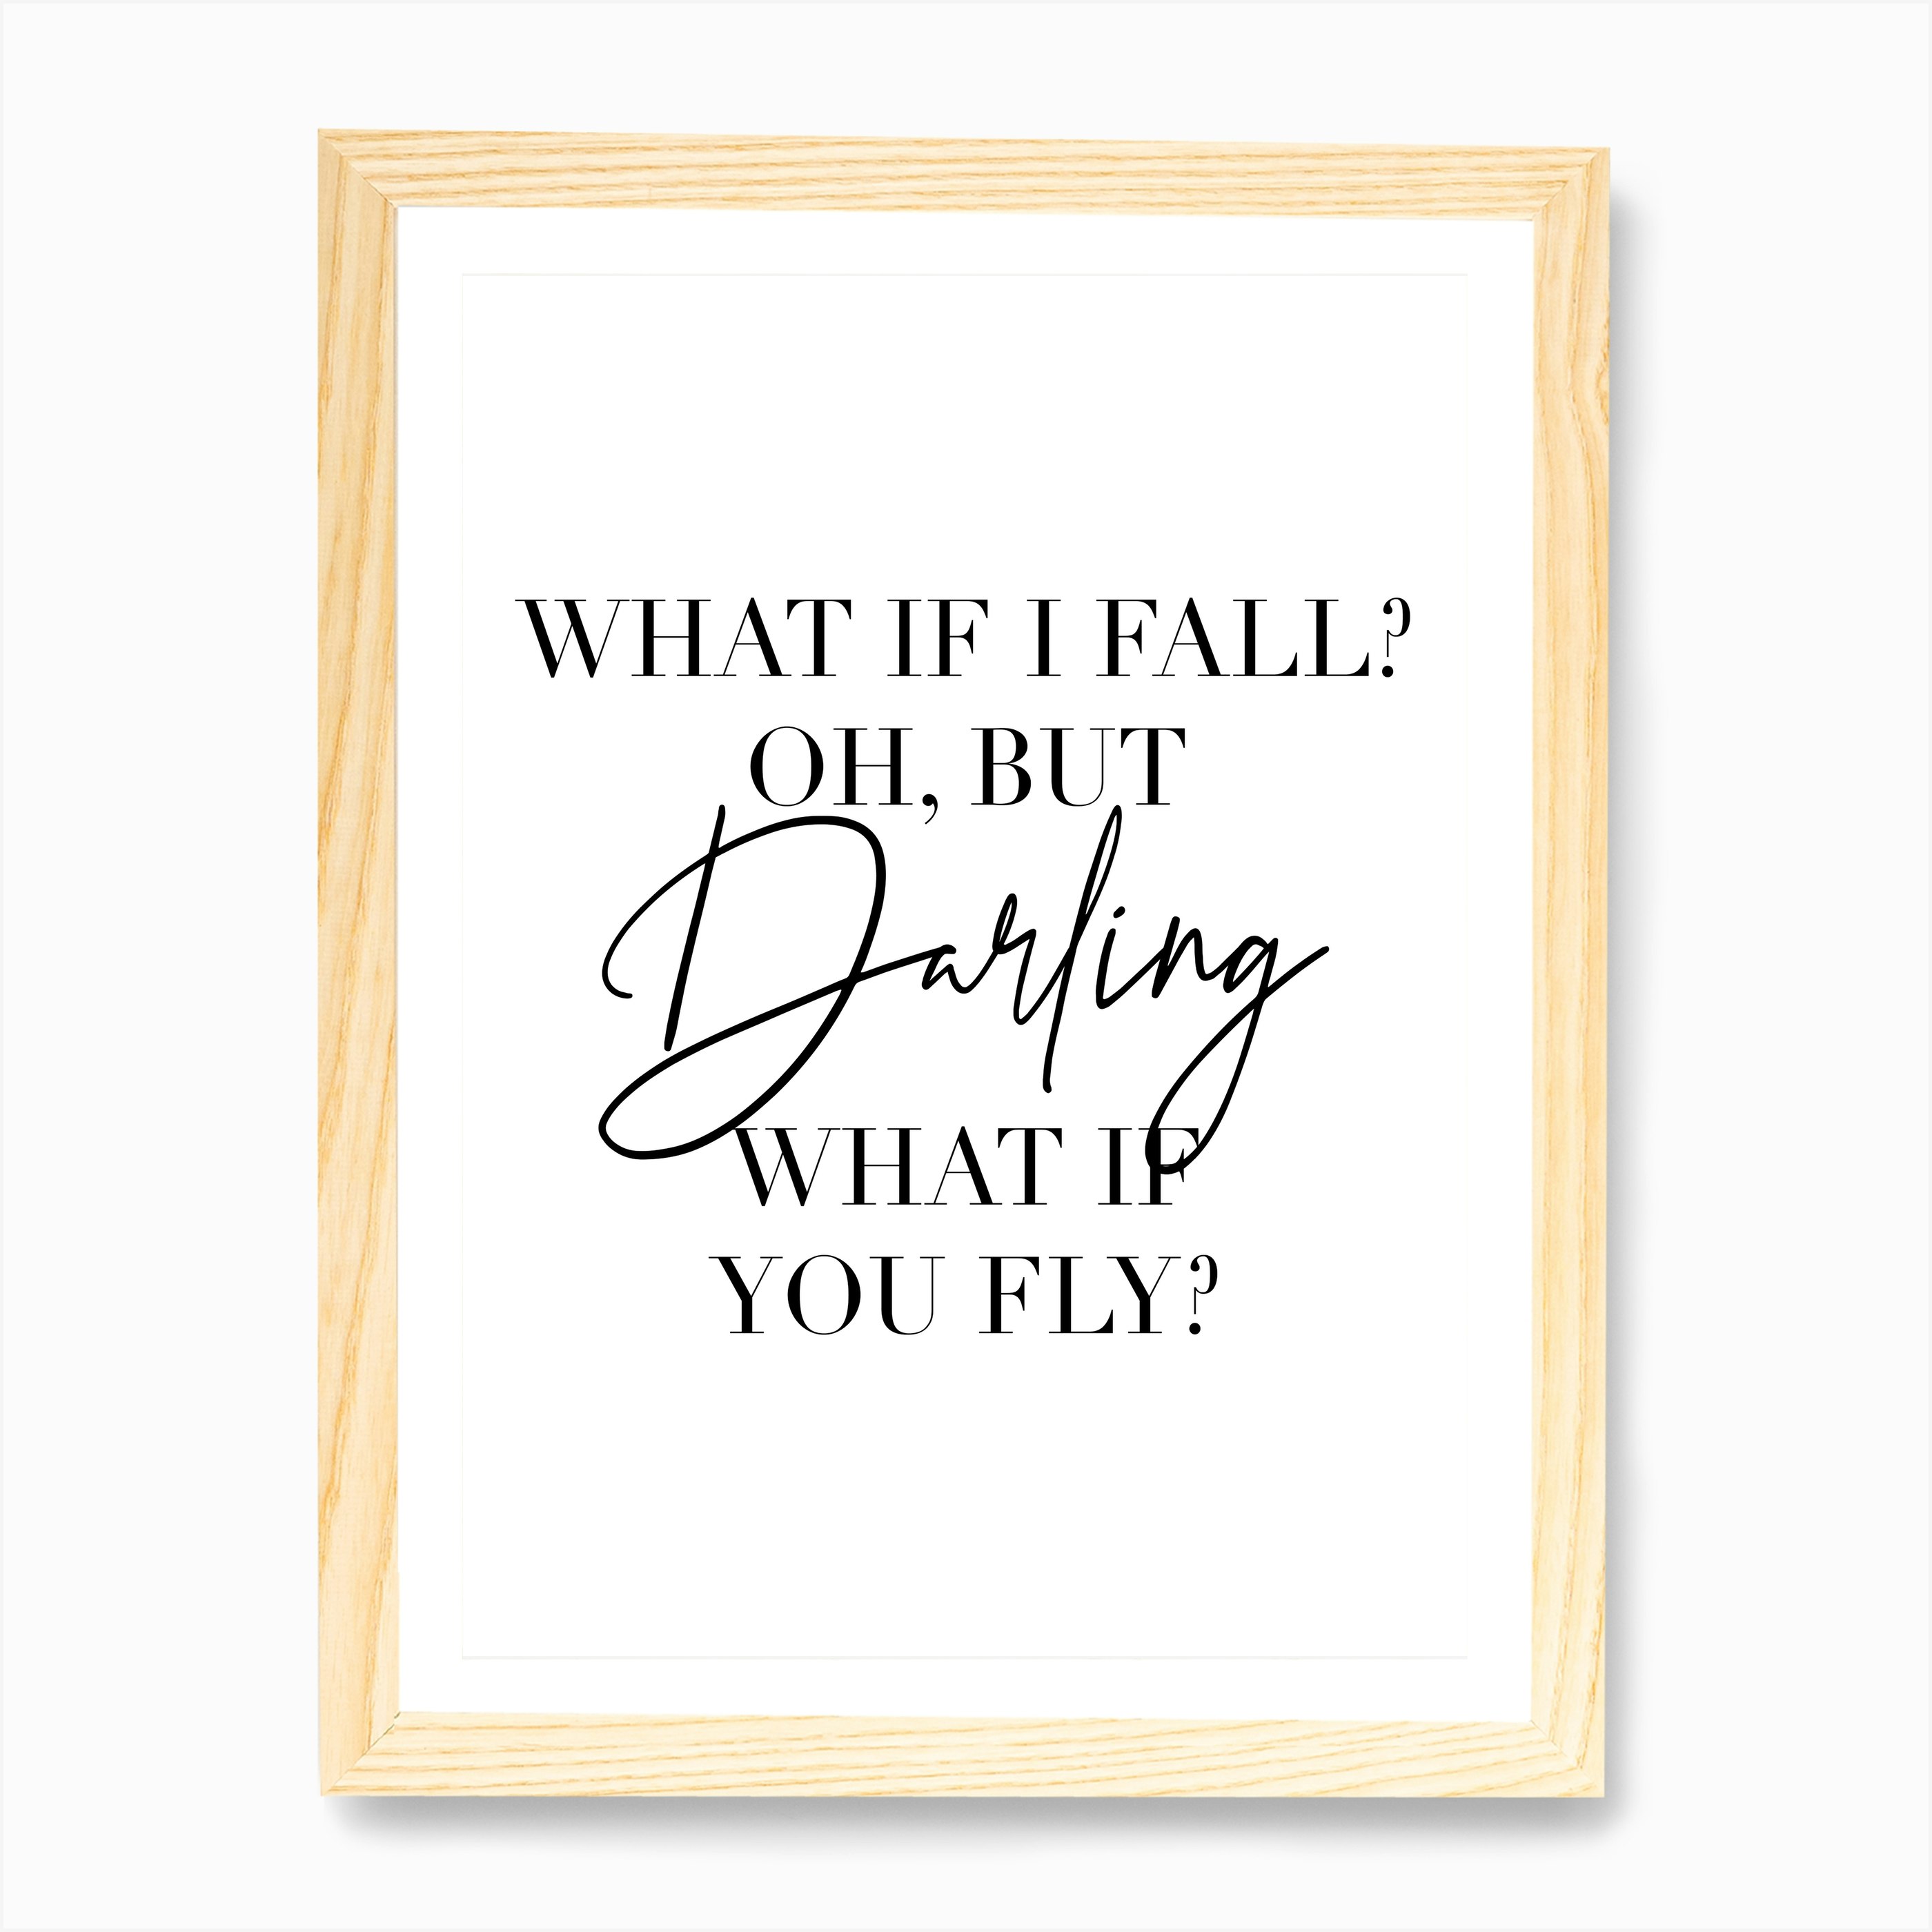 What If I Fall Oh But Darling What If You Fly Art Print By Typologie Paper Co Fy